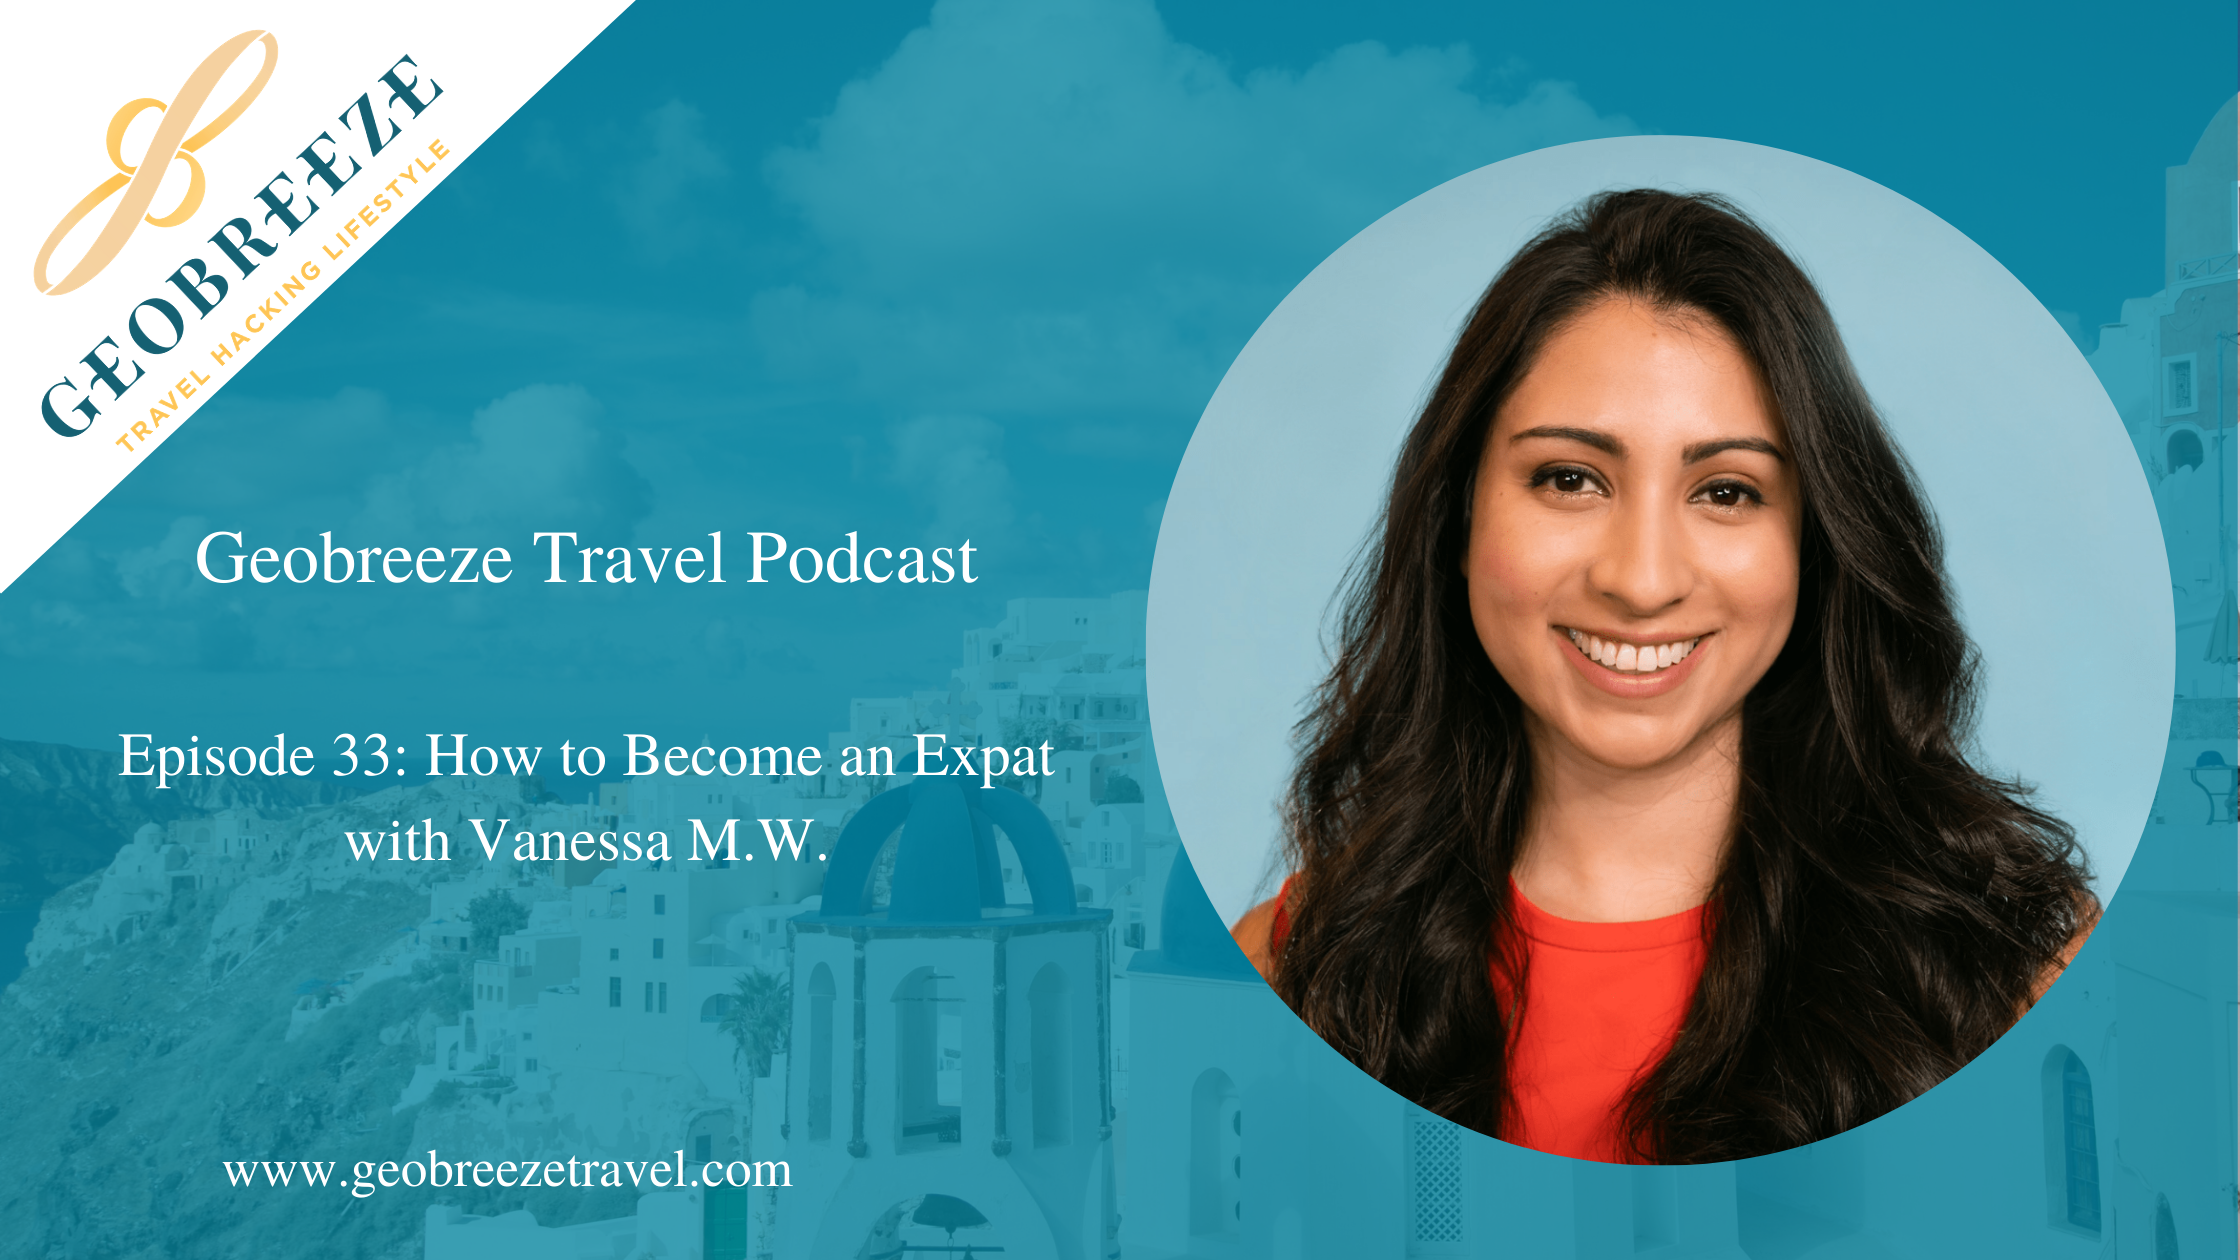 Episode 33: How to Become an Expat with Vanessa M.W.